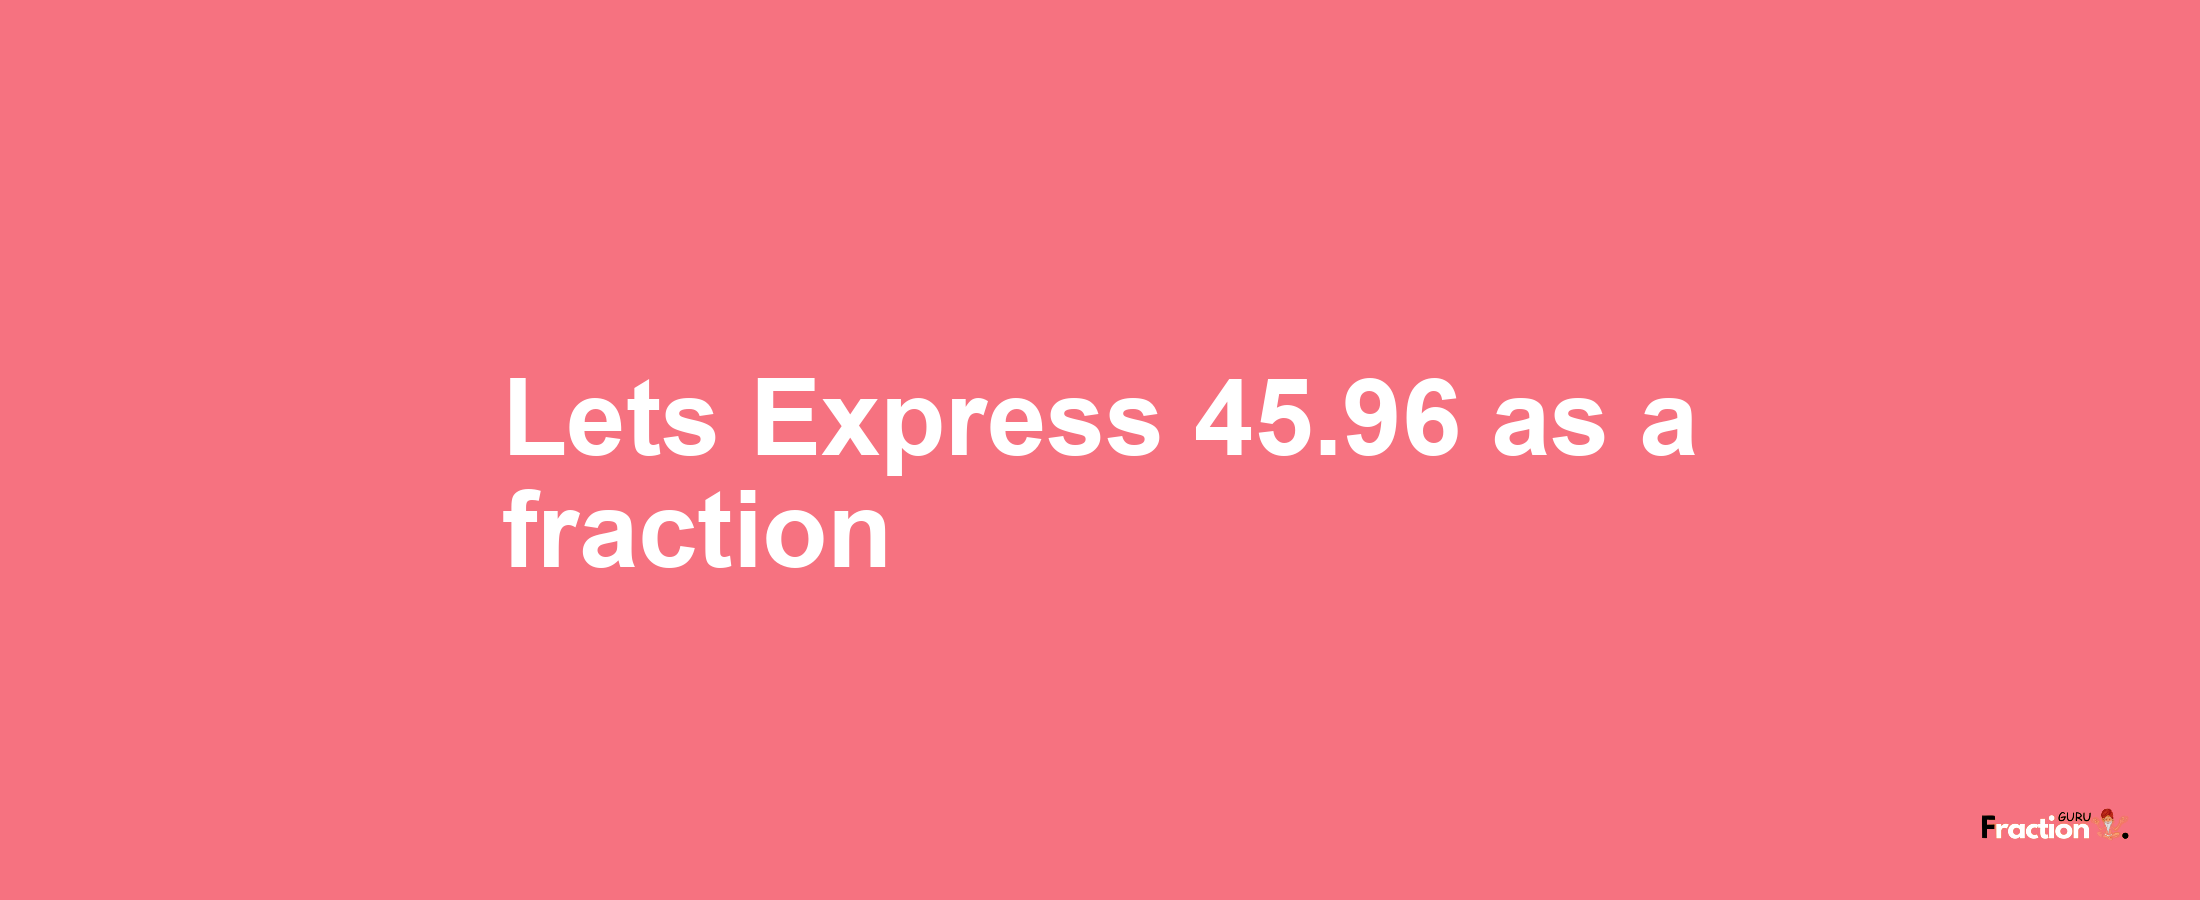 Lets Express 45.96 as afraction